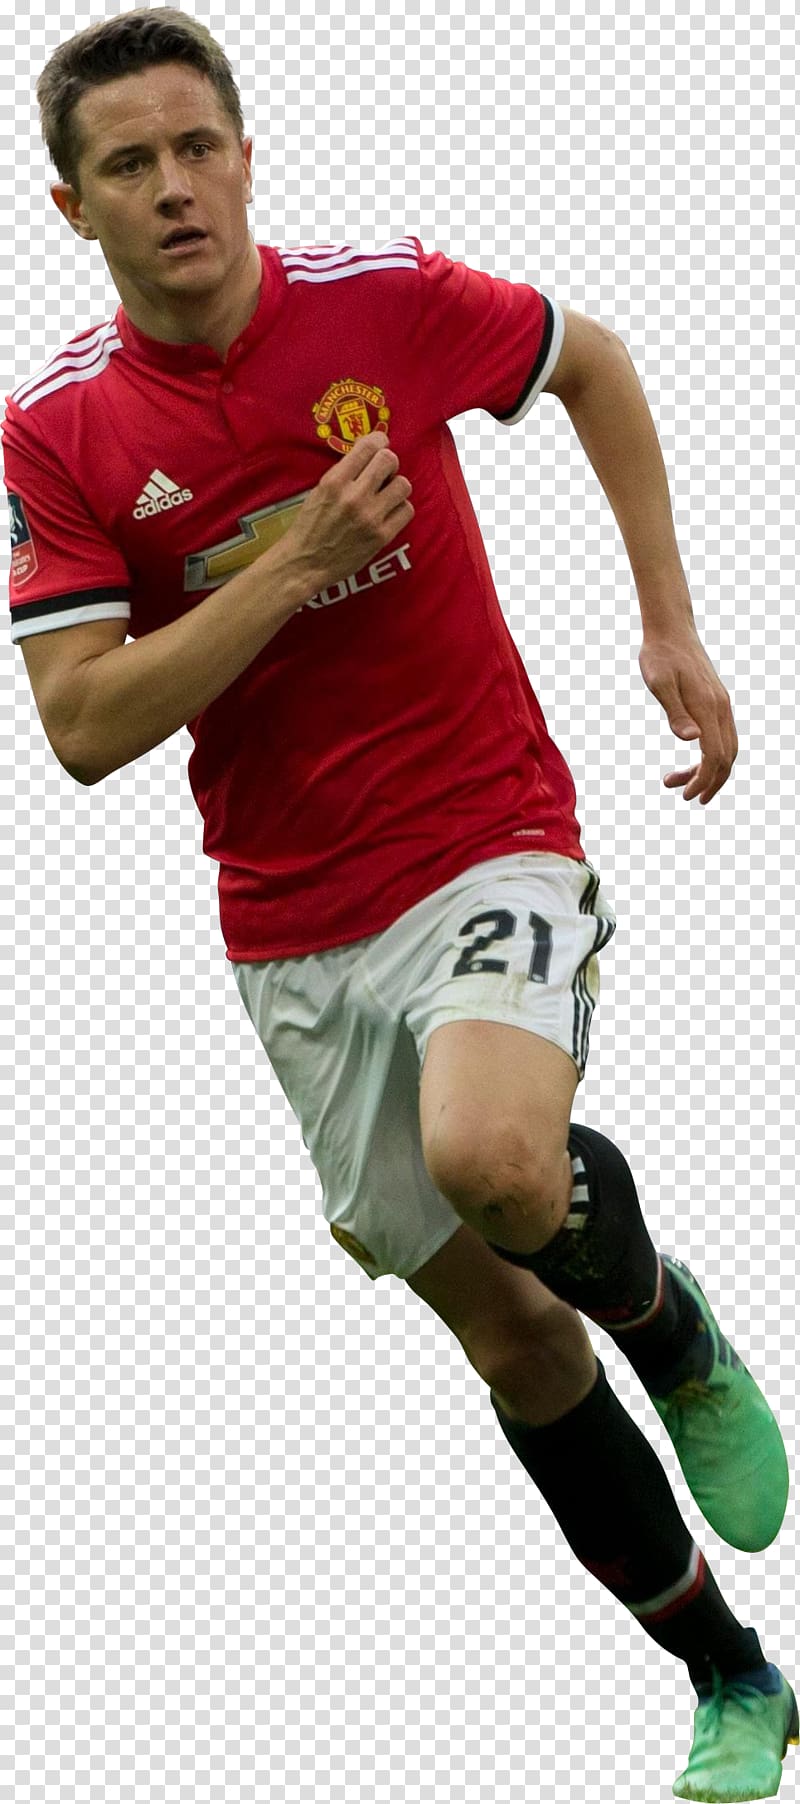 Ander Herrera Manchester United F.C. Newcastle United F.C. Football player, Man Utd transparent background PNG clipart